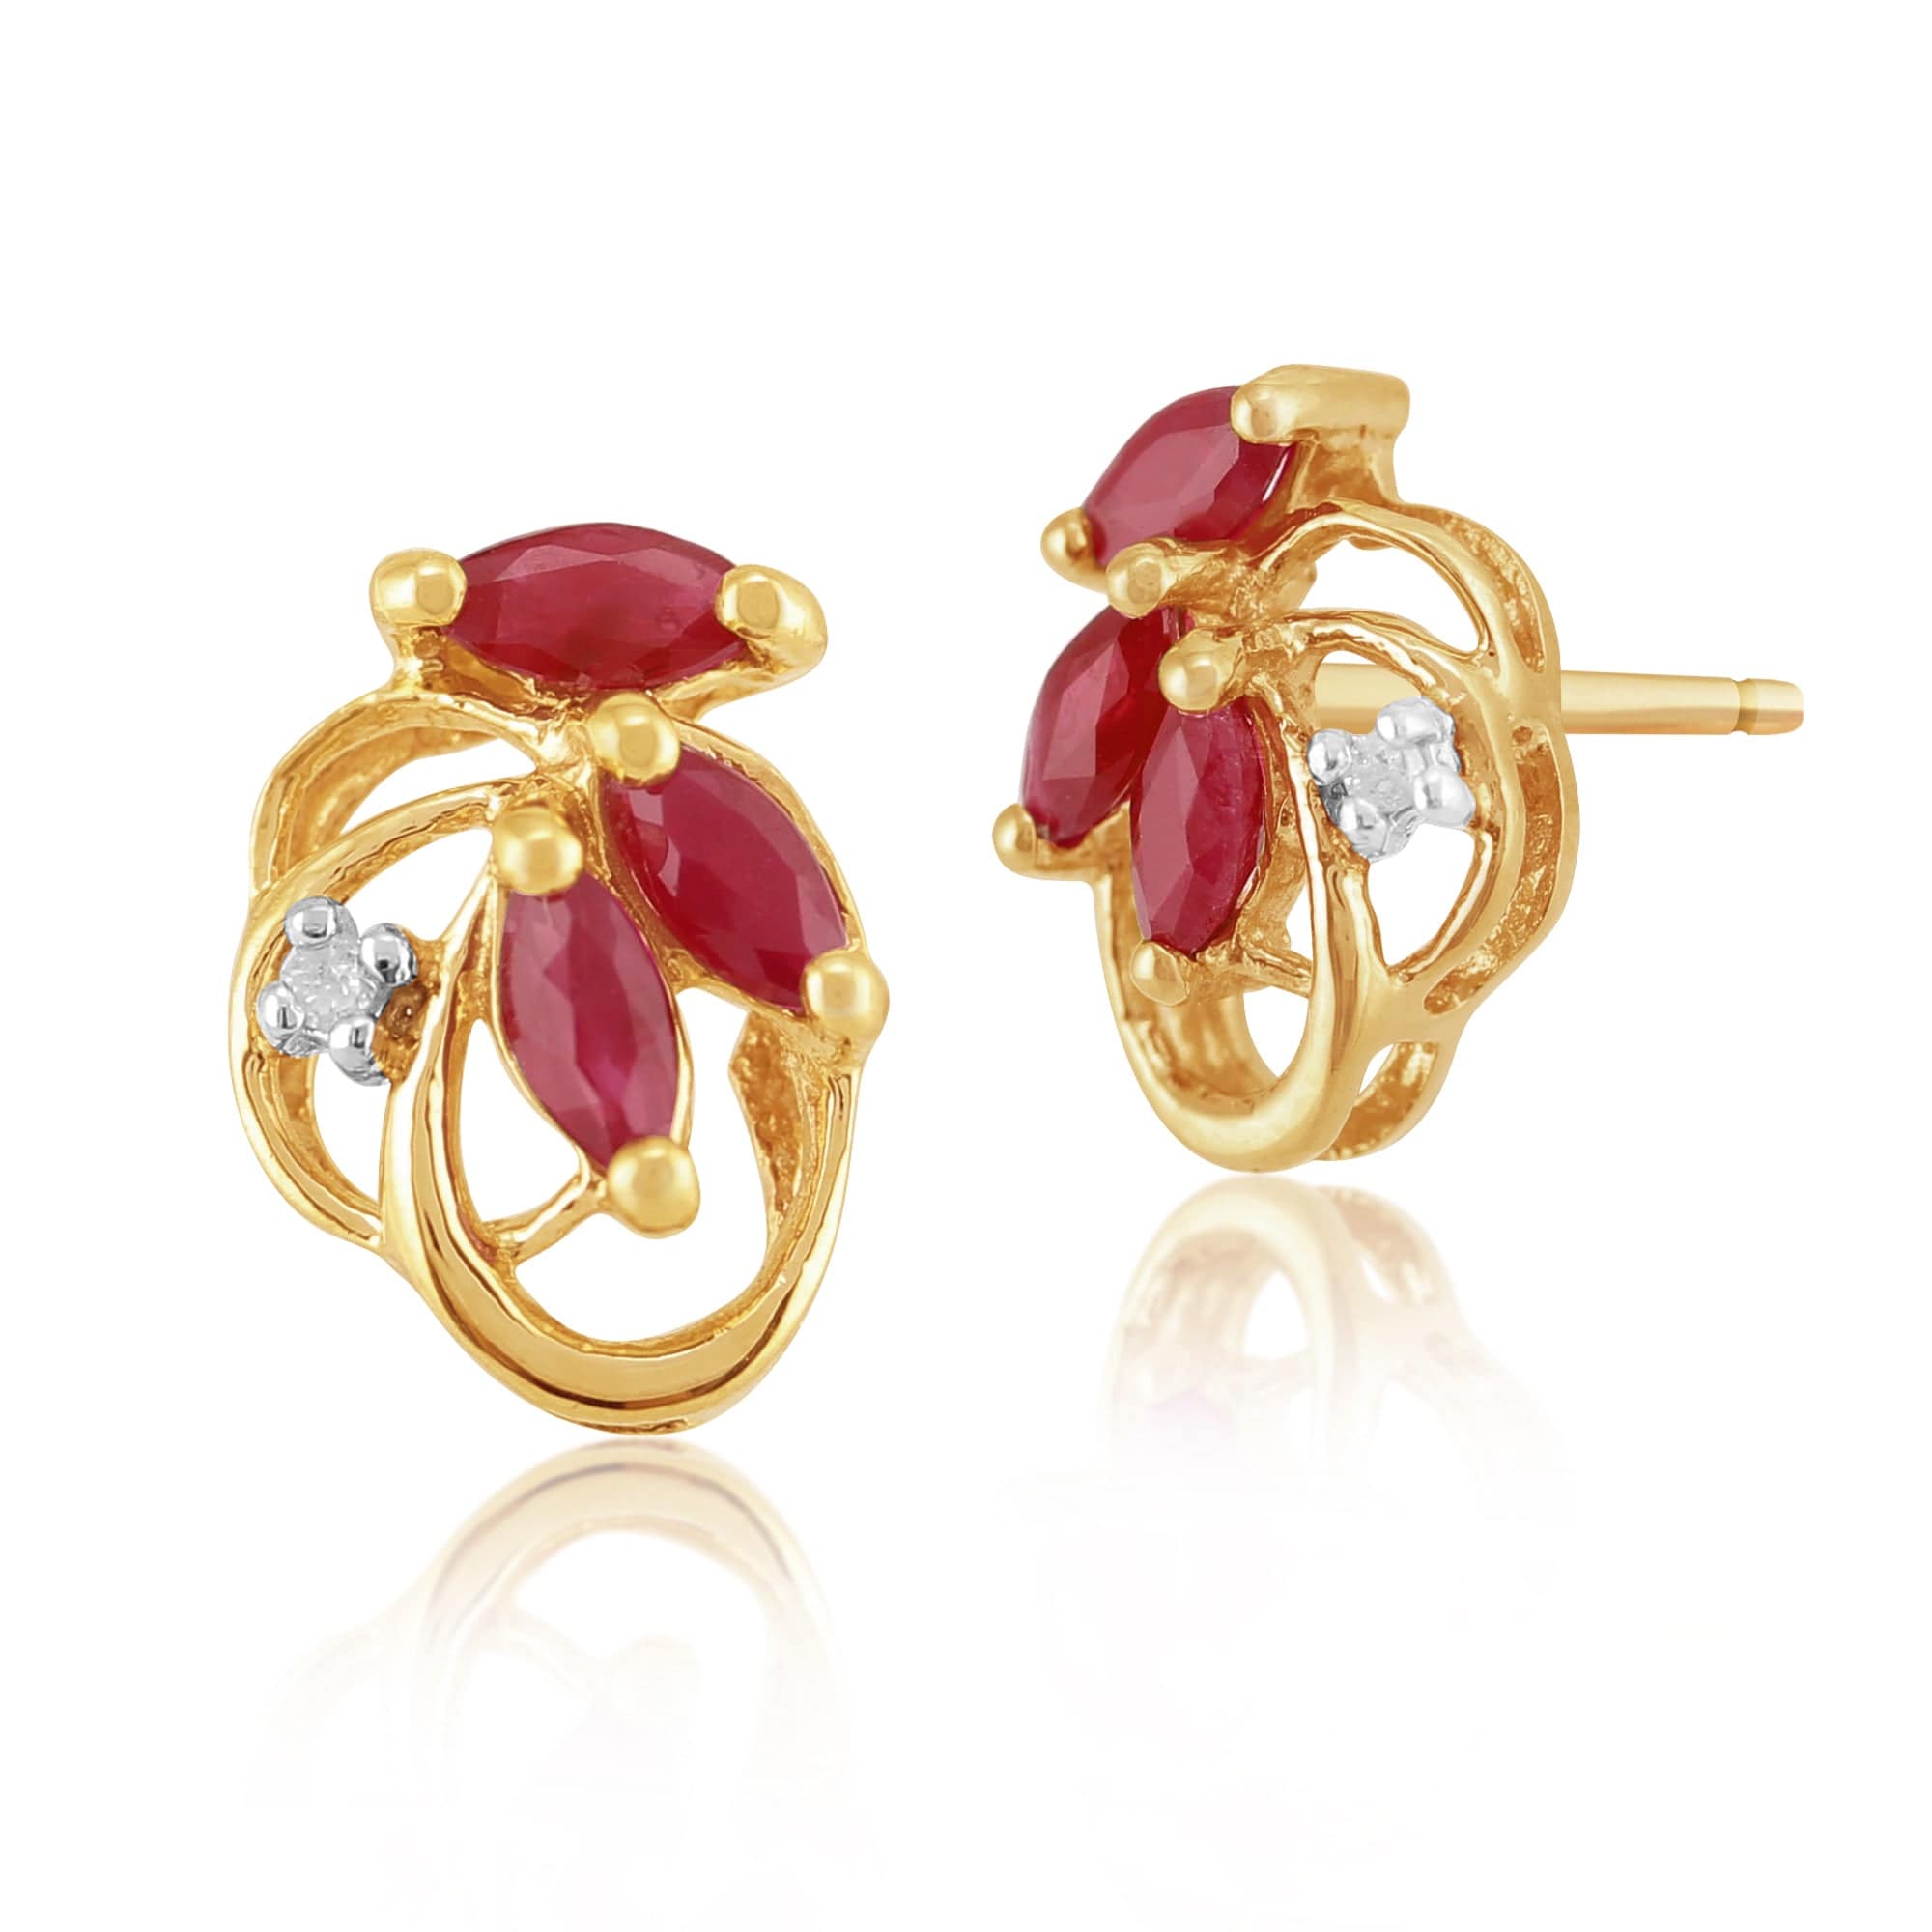 Floral Marquise Ruby & Diamond Stud Earrings in 9ct Yellow Gold - Gemondo